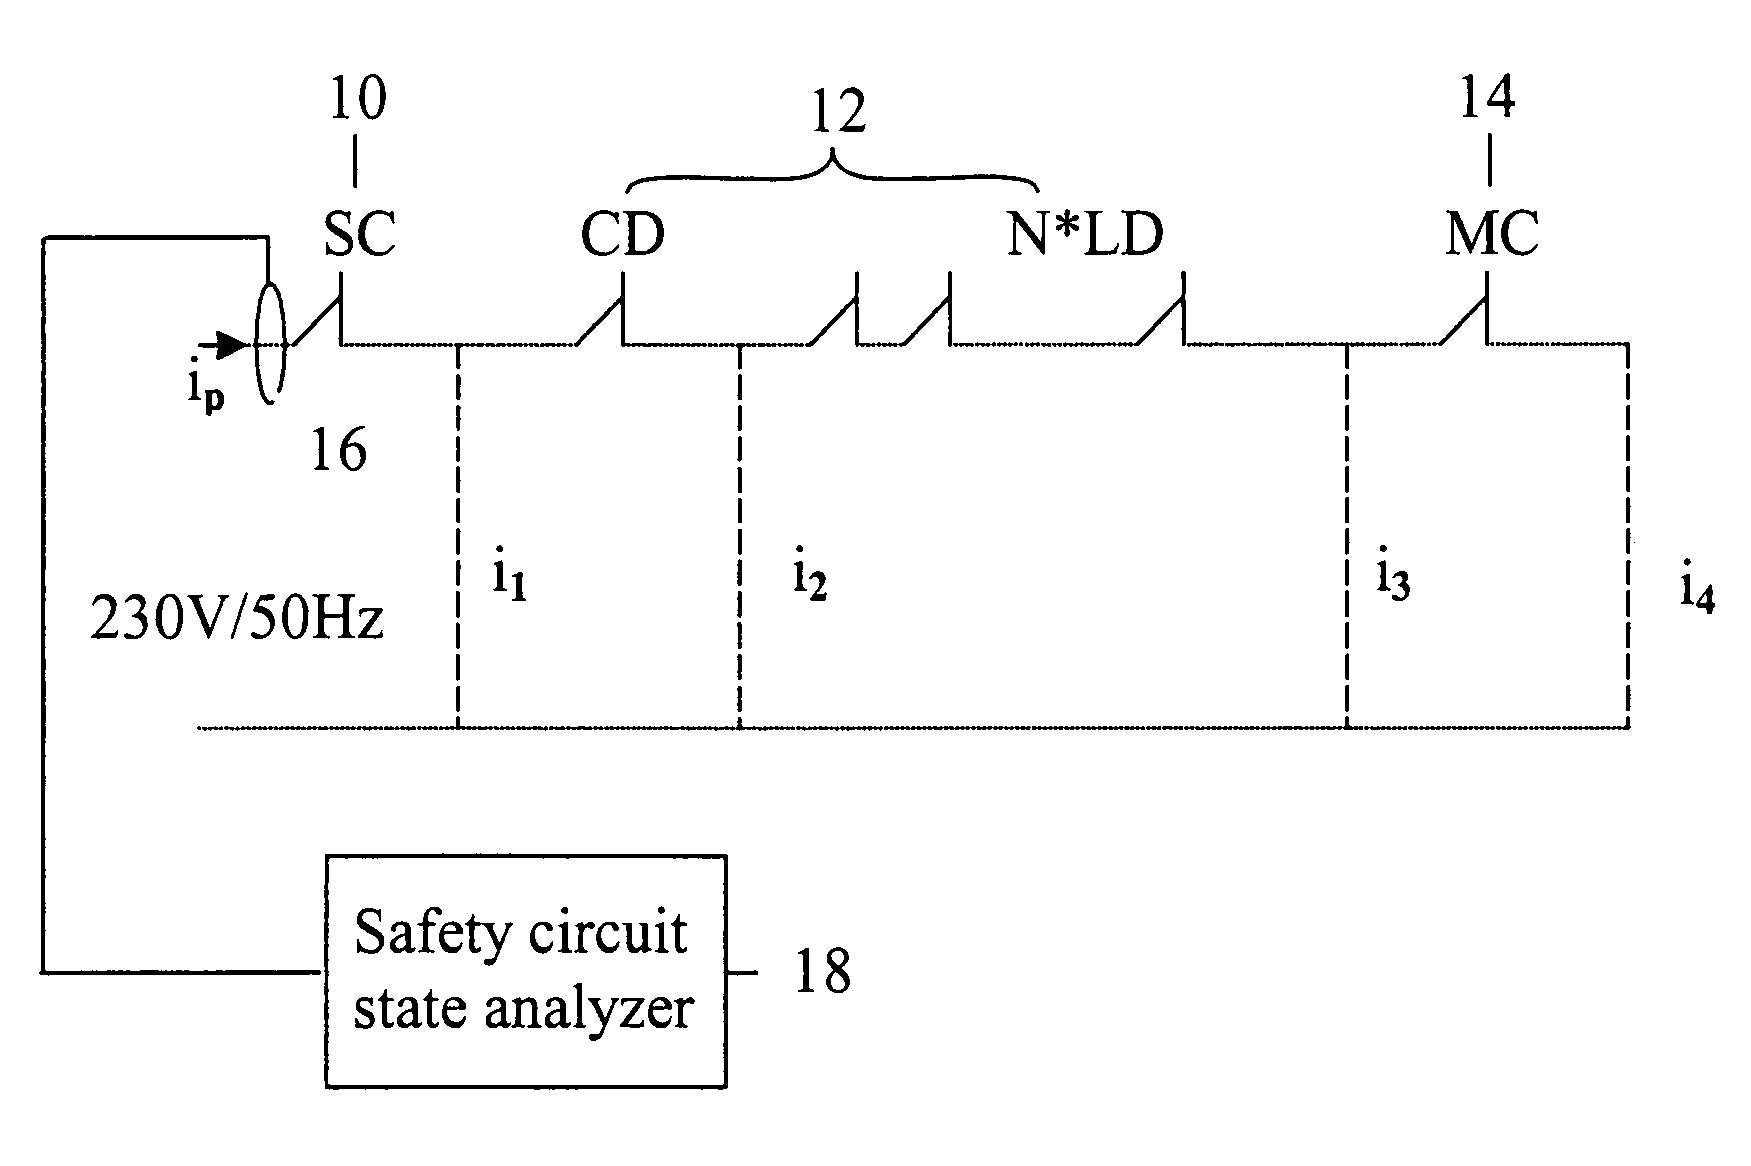 Elevator safety circuit monitoring system and method